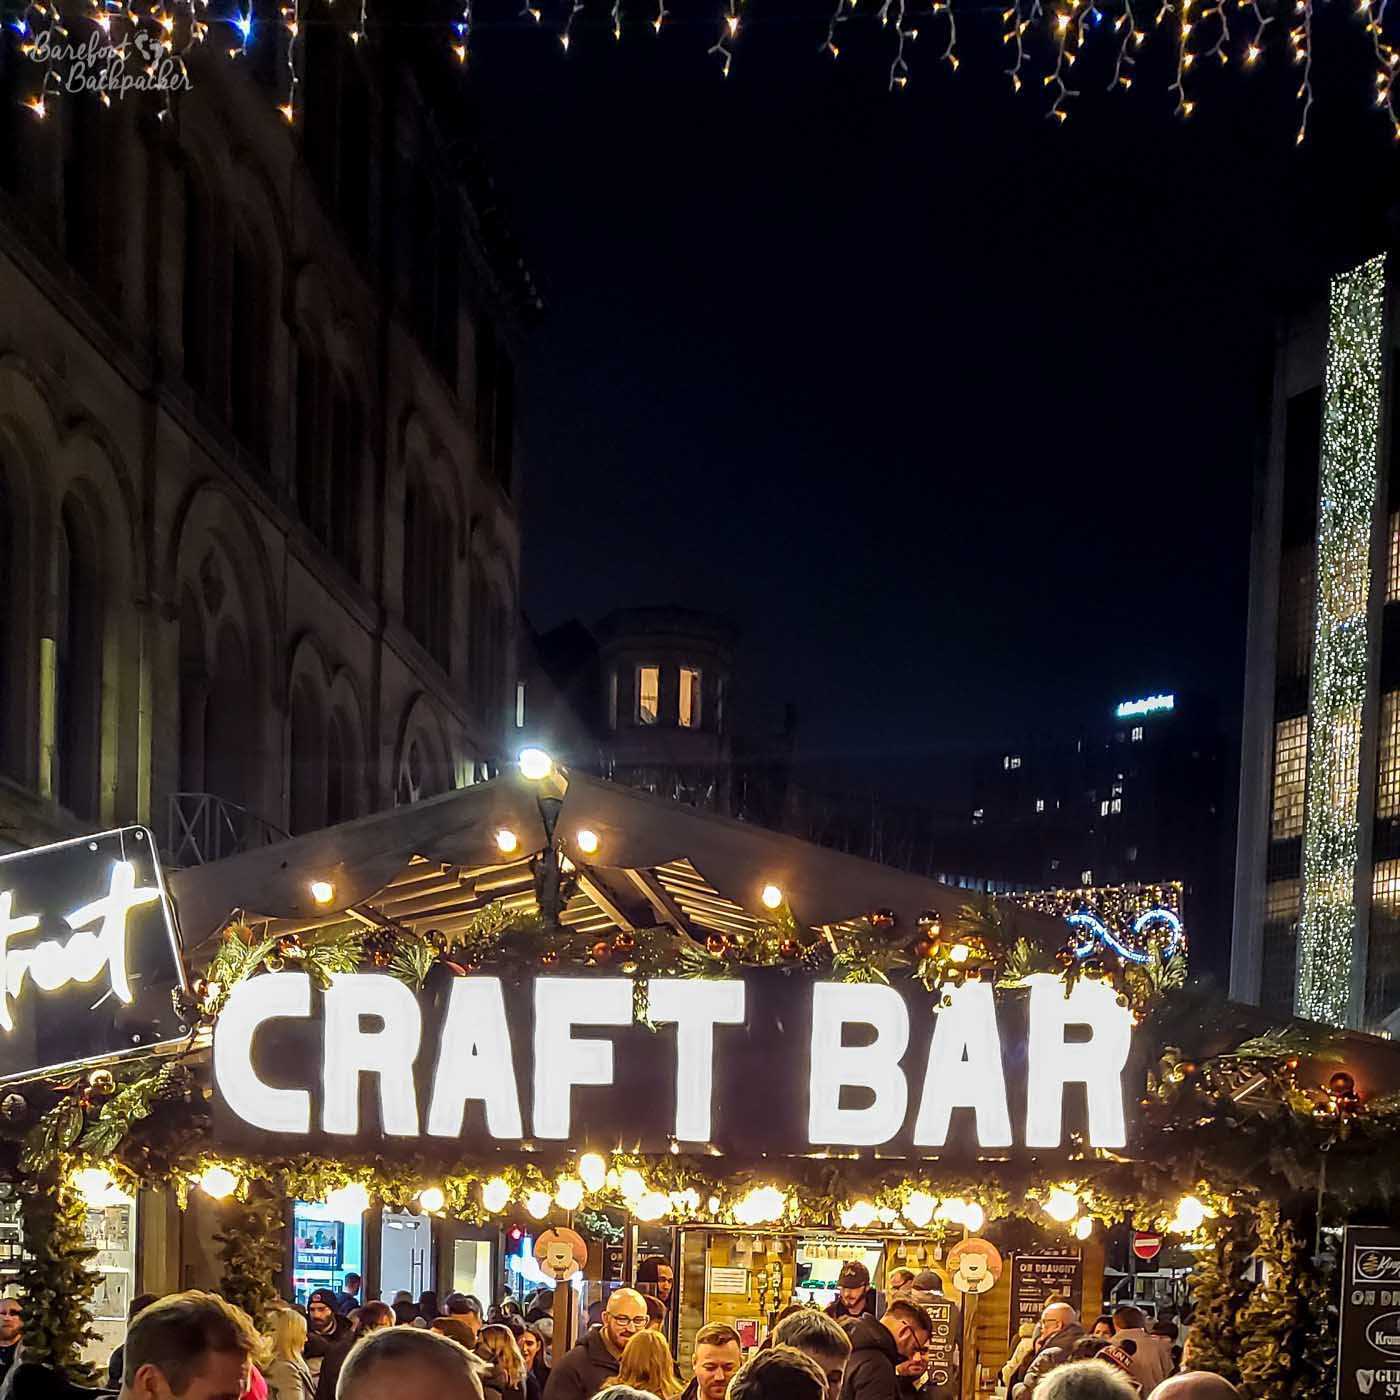 A shot taken at night, showing a pop-up cabin in a city street, King Street Craft Bar in bright lights. The place seems quite crowded.